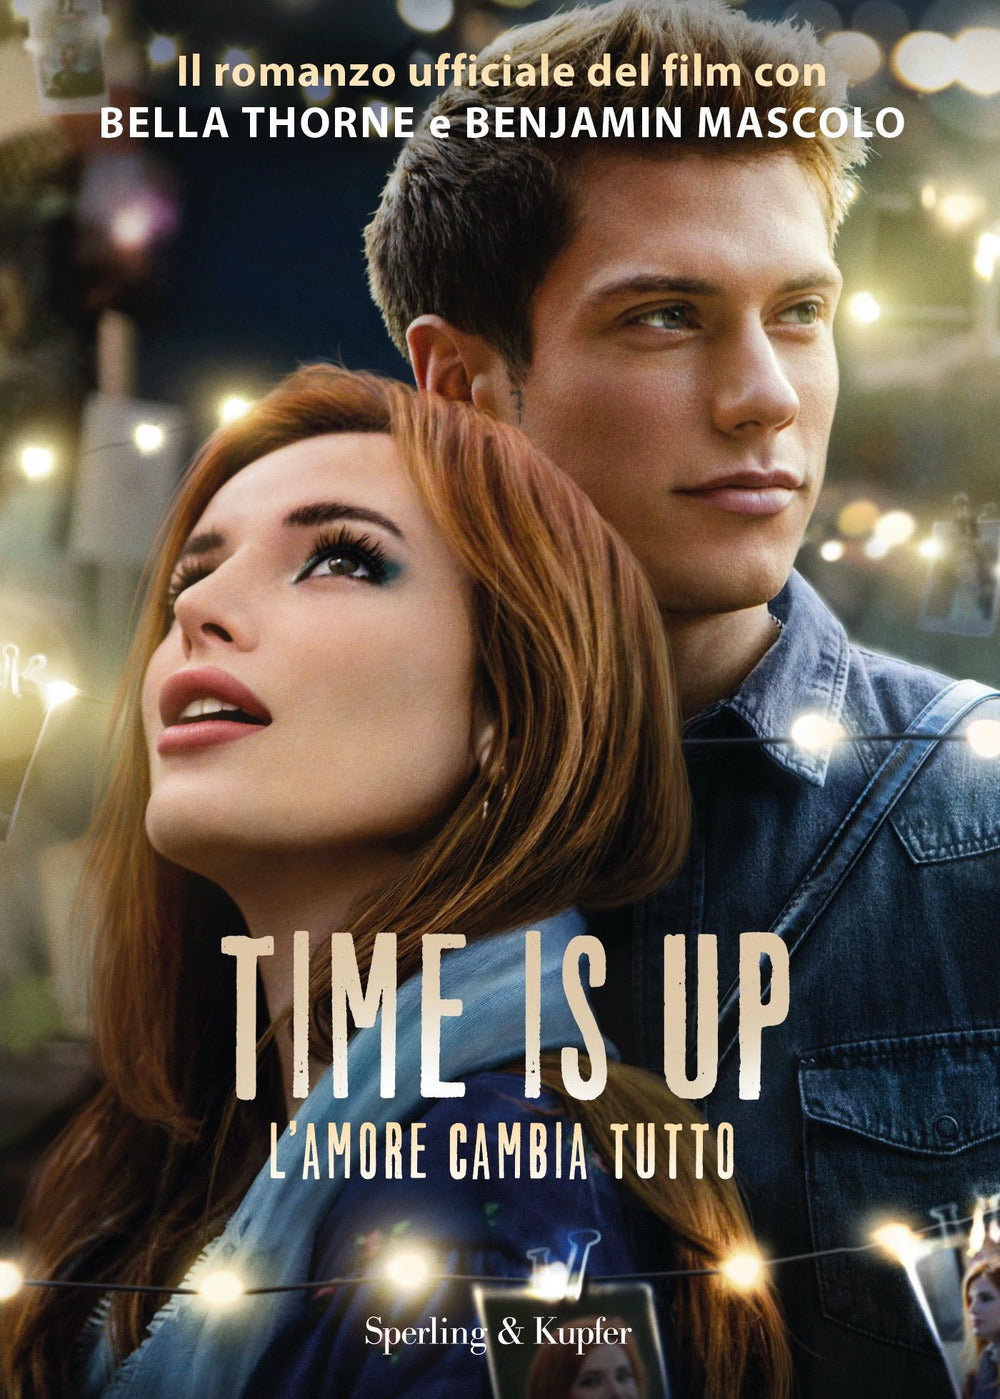 Time is up. L'amore cambia tutto.